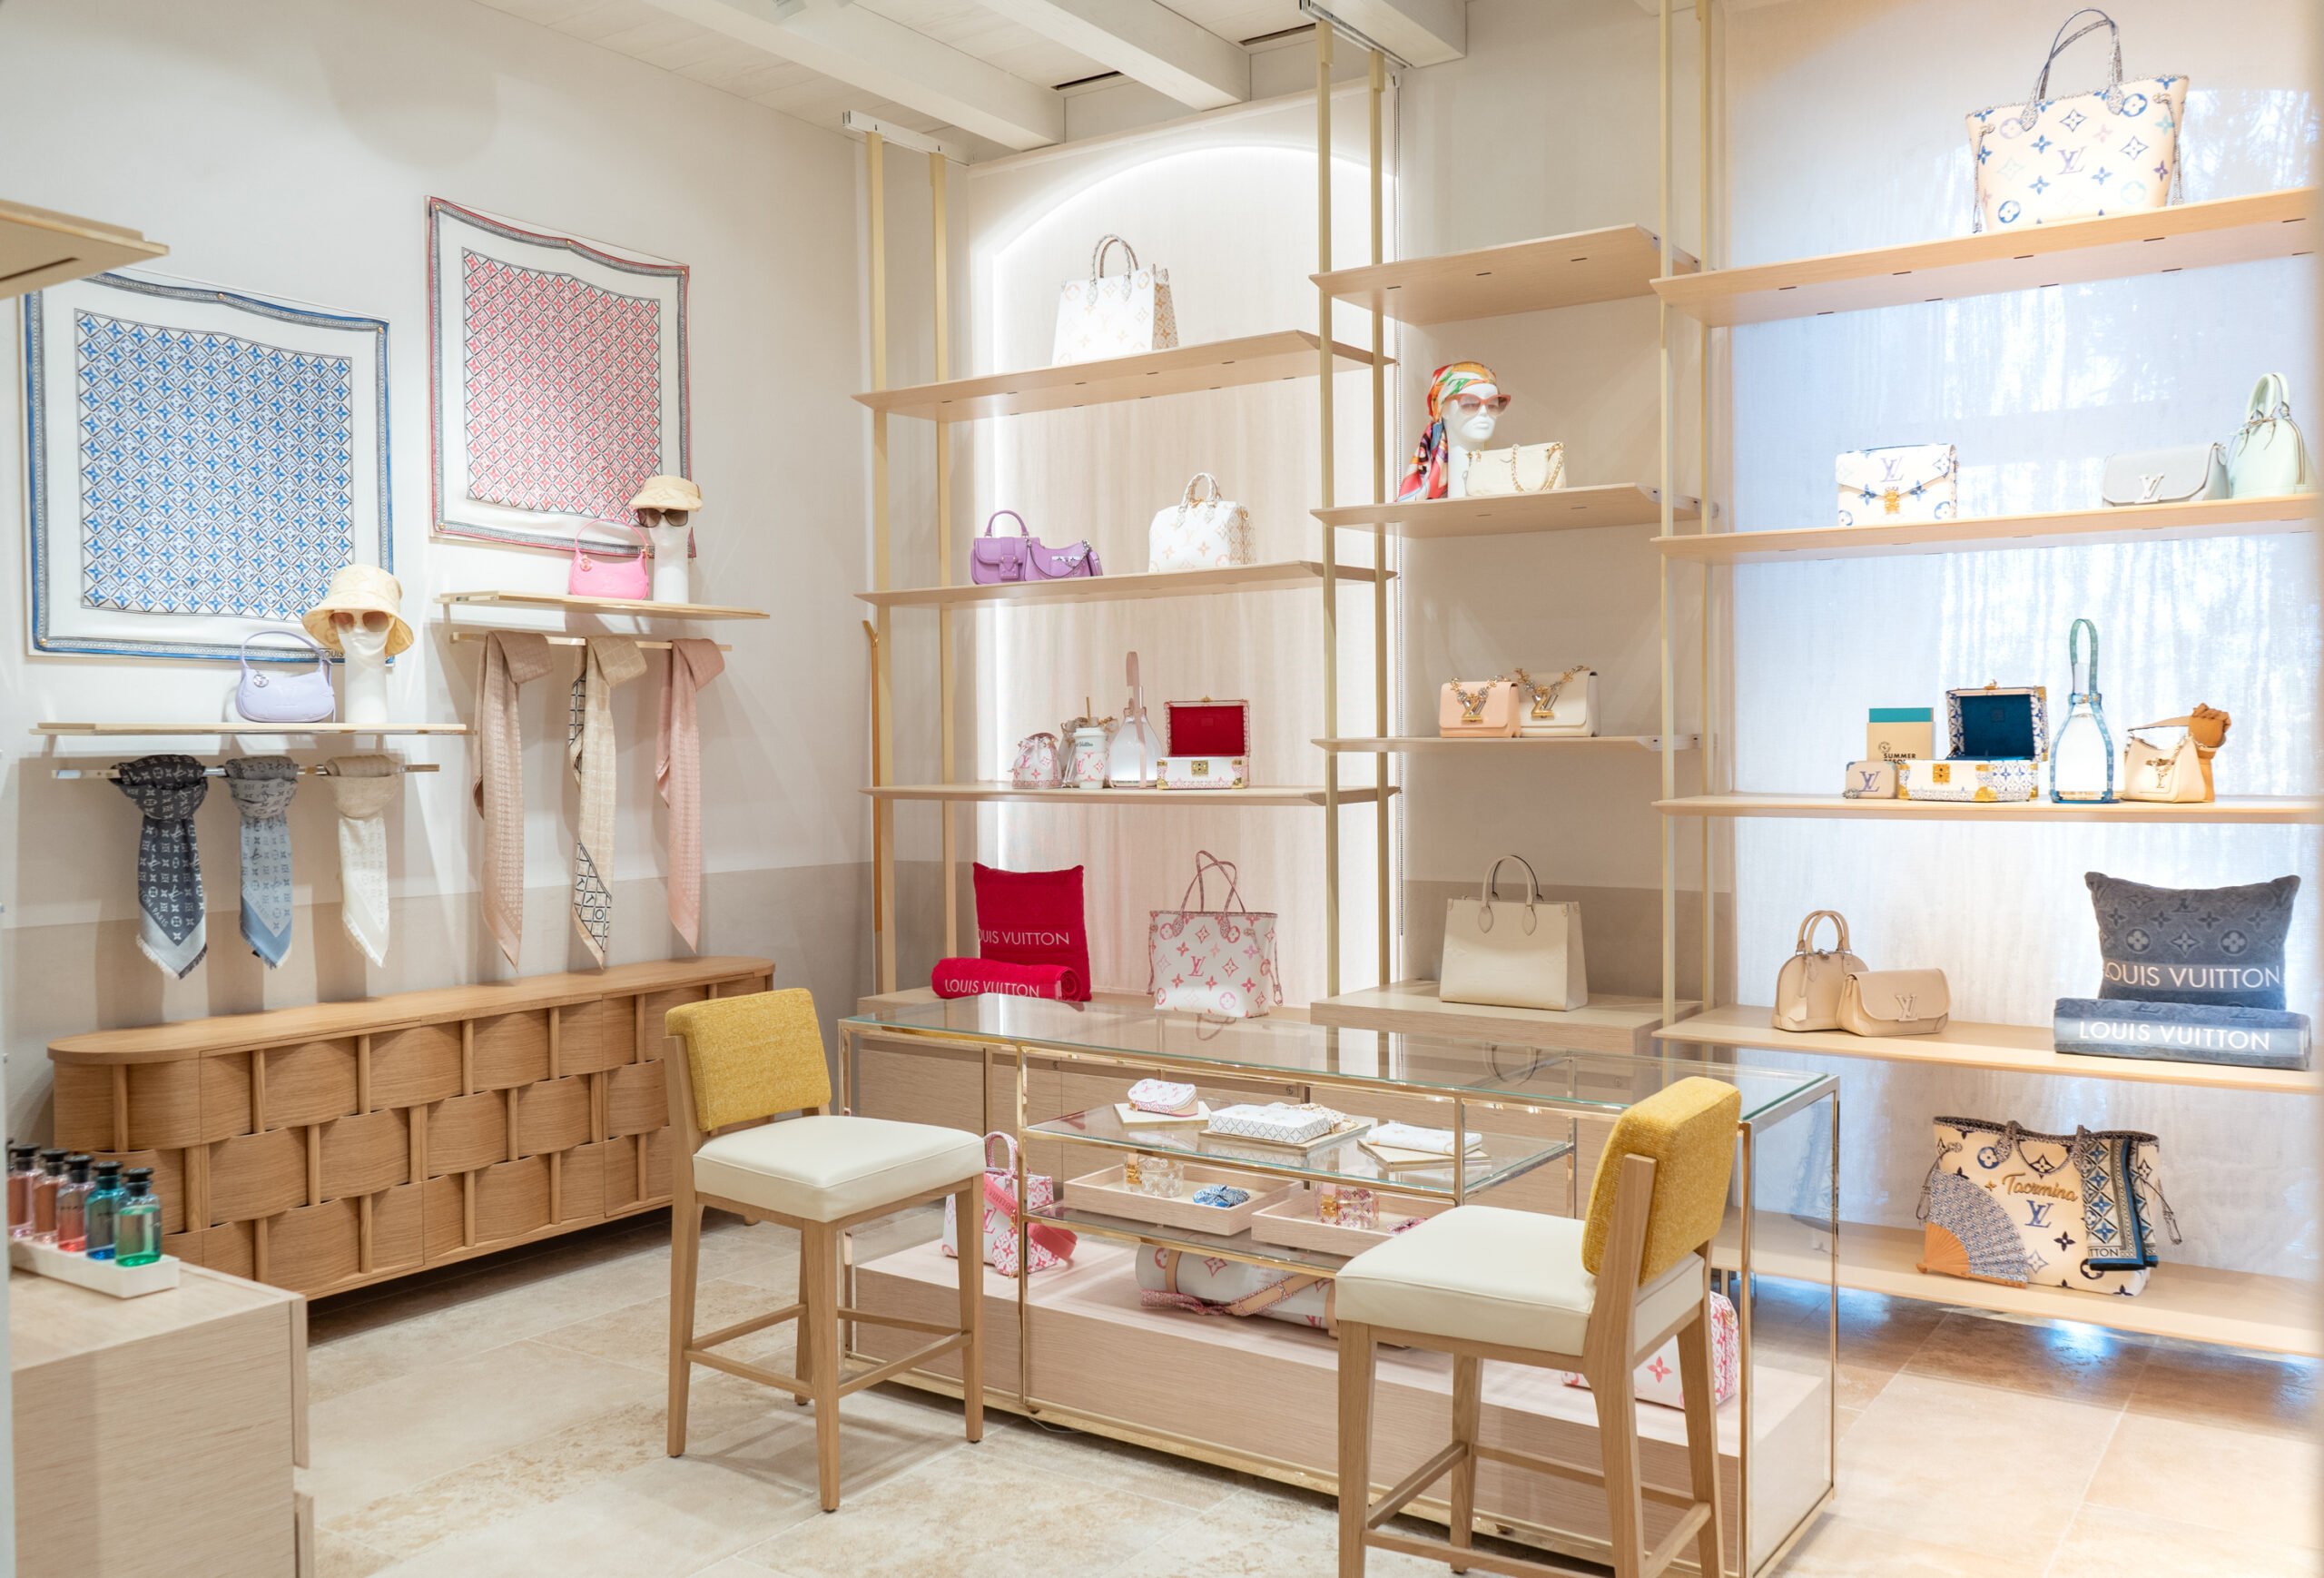 Louis Vuitton unveils its first Italian Café and new store in Taormina -  The Blonde Salad